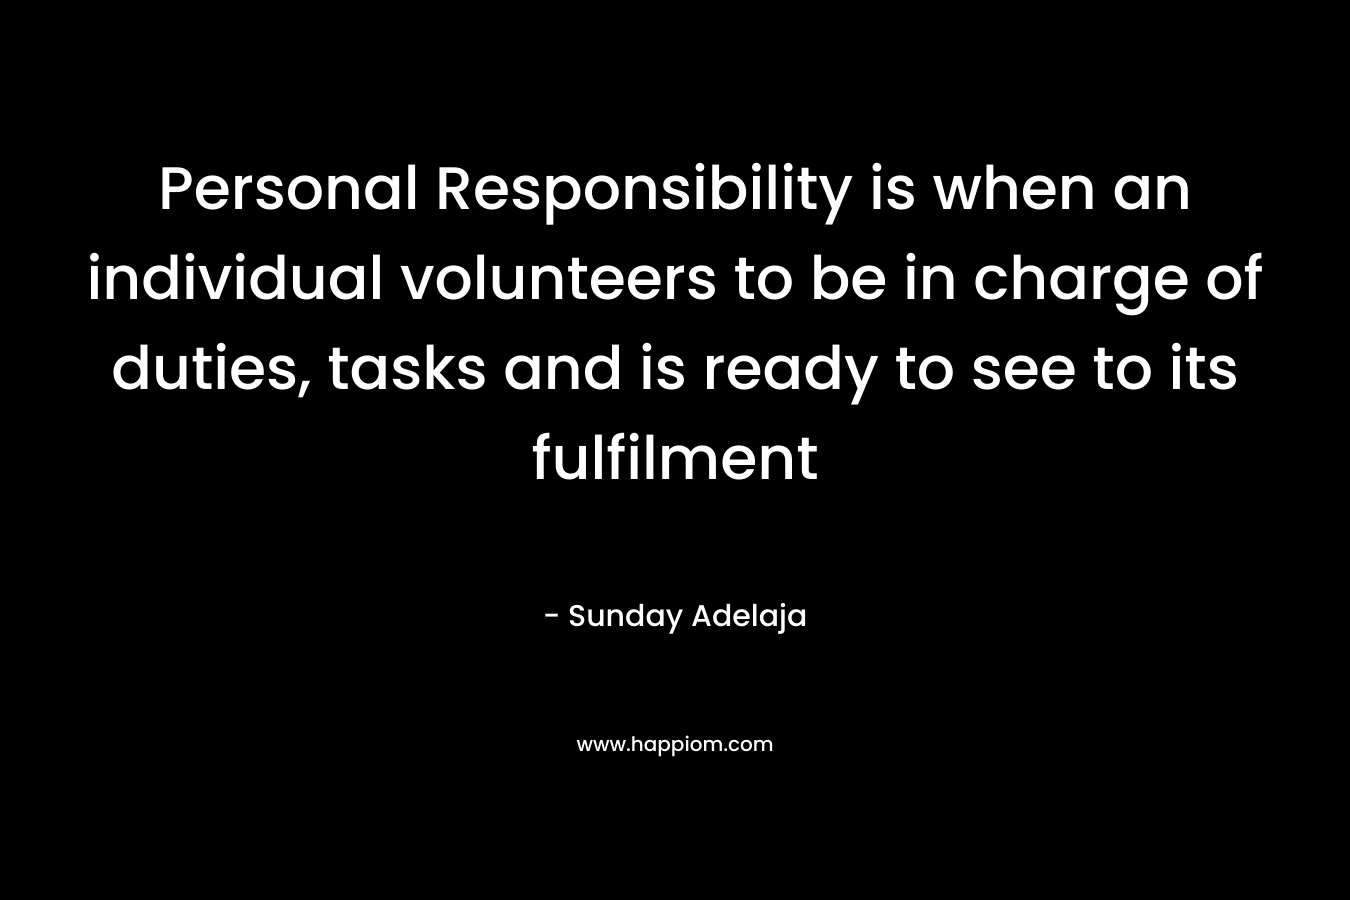 Personal Responsibility is when an individual volunteers to be in charge of duties, tasks and is ready to see to its fulfilment – Sunday Adelaja